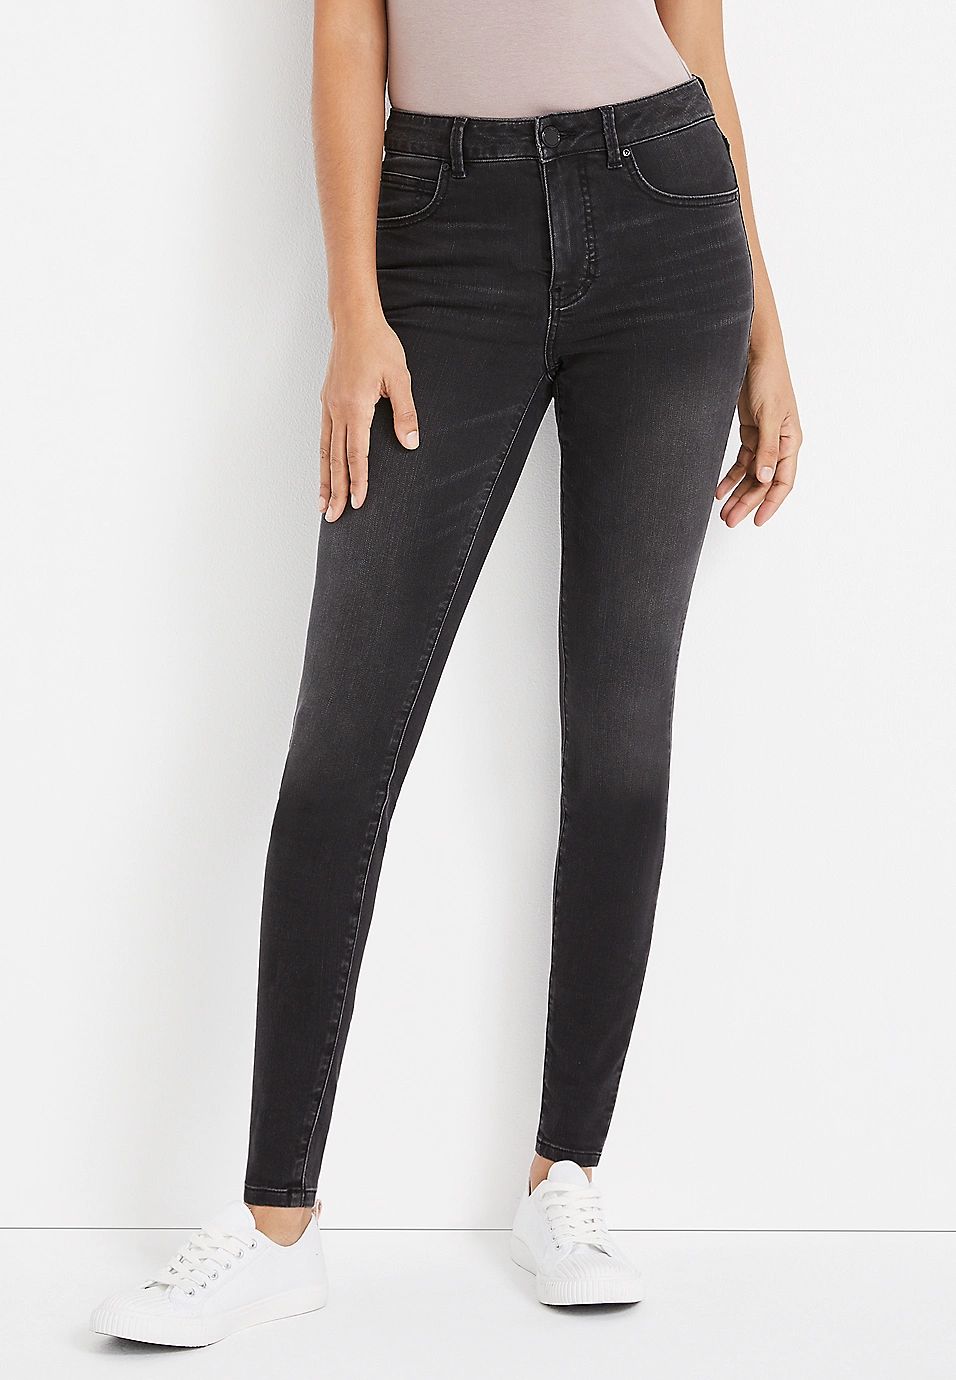 m jeans by maurices™ Everflex™ Black Skinny High Rise Jean | Maurices